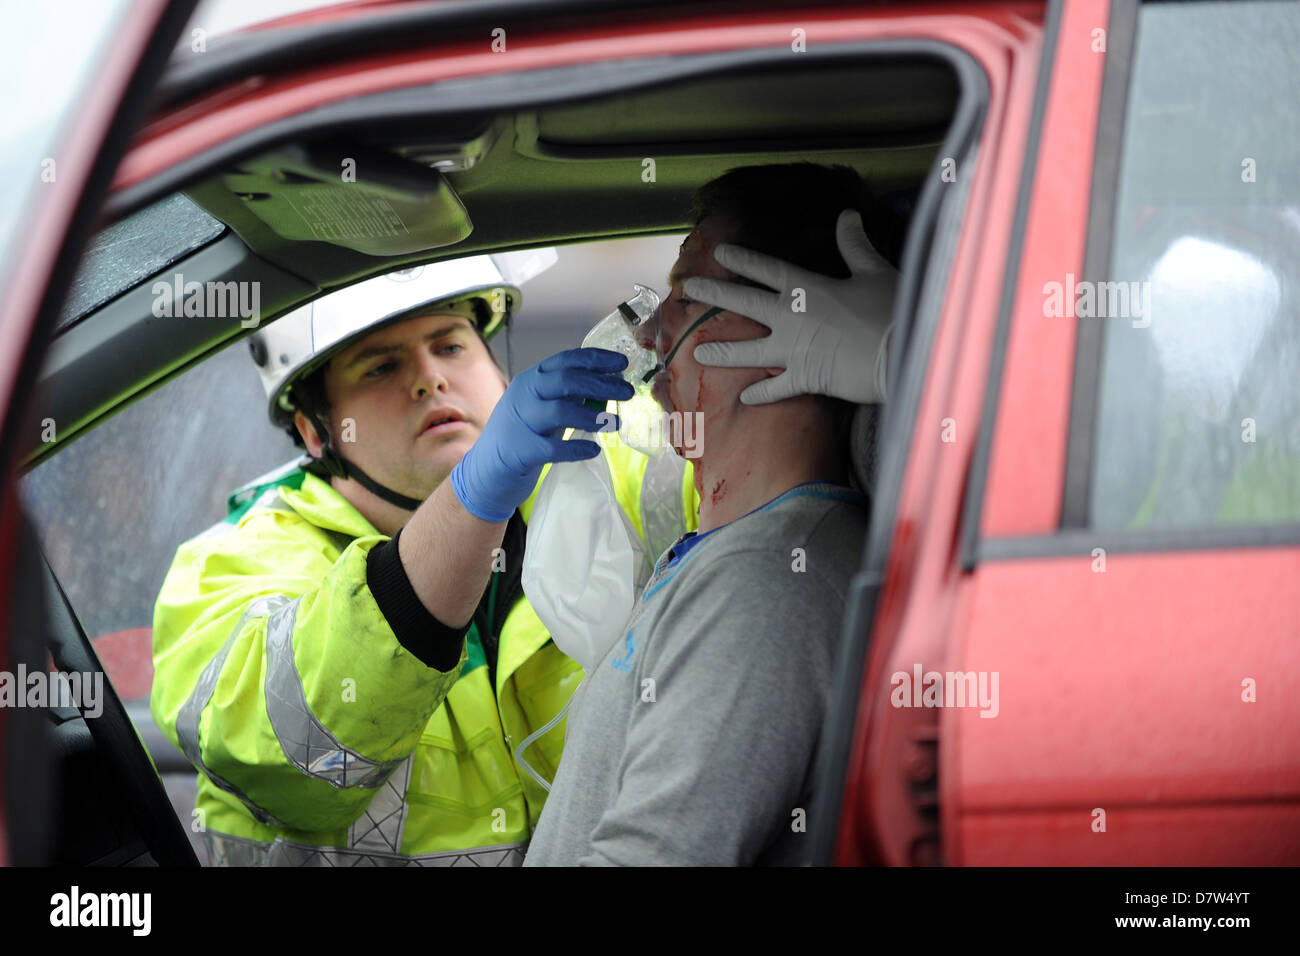 A road traffic accident (rta) victim is dealt with by an ambulance crew after a car crash. Stock Photo